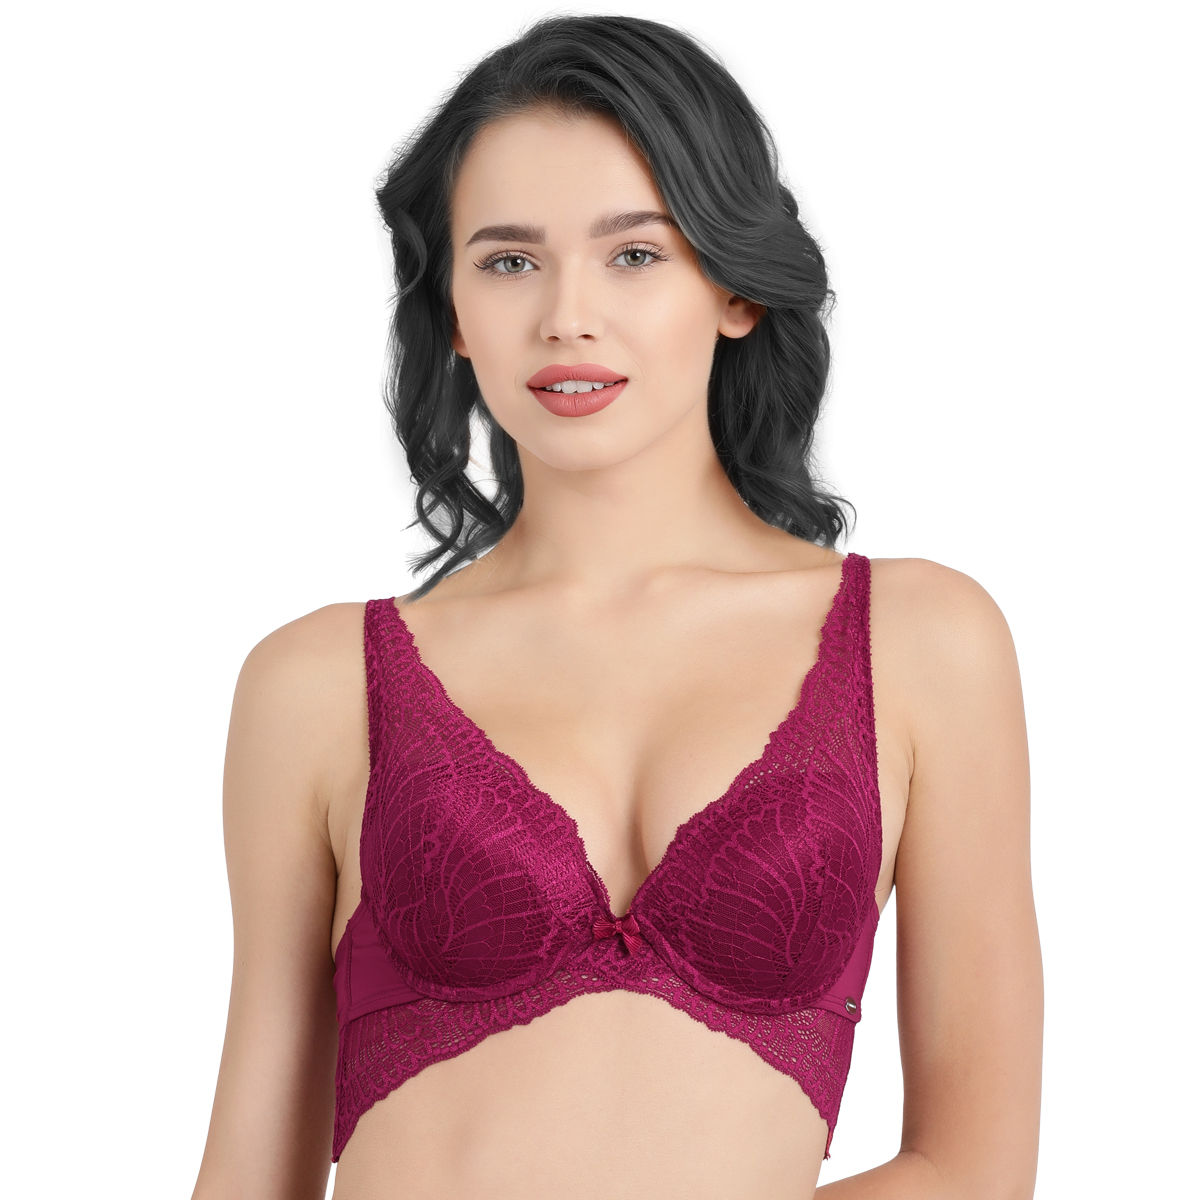 Enamor B Cup Size Bra Price Starting From Rs 619. Find Verified Sellers in  Hooghly - JdMart